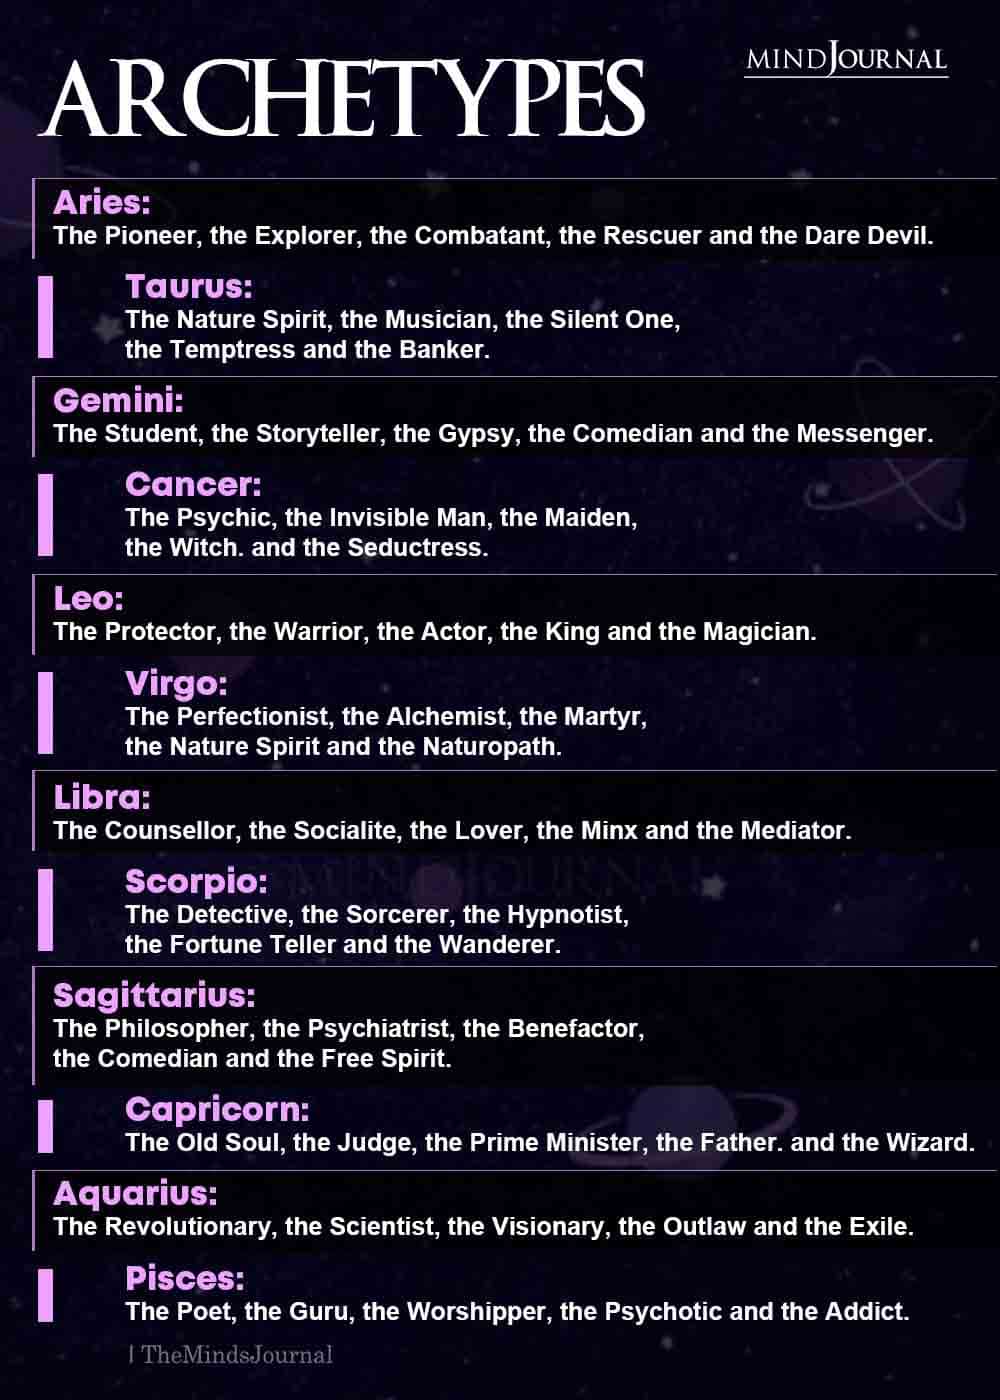 Zodiac Signs and Their Archetypes